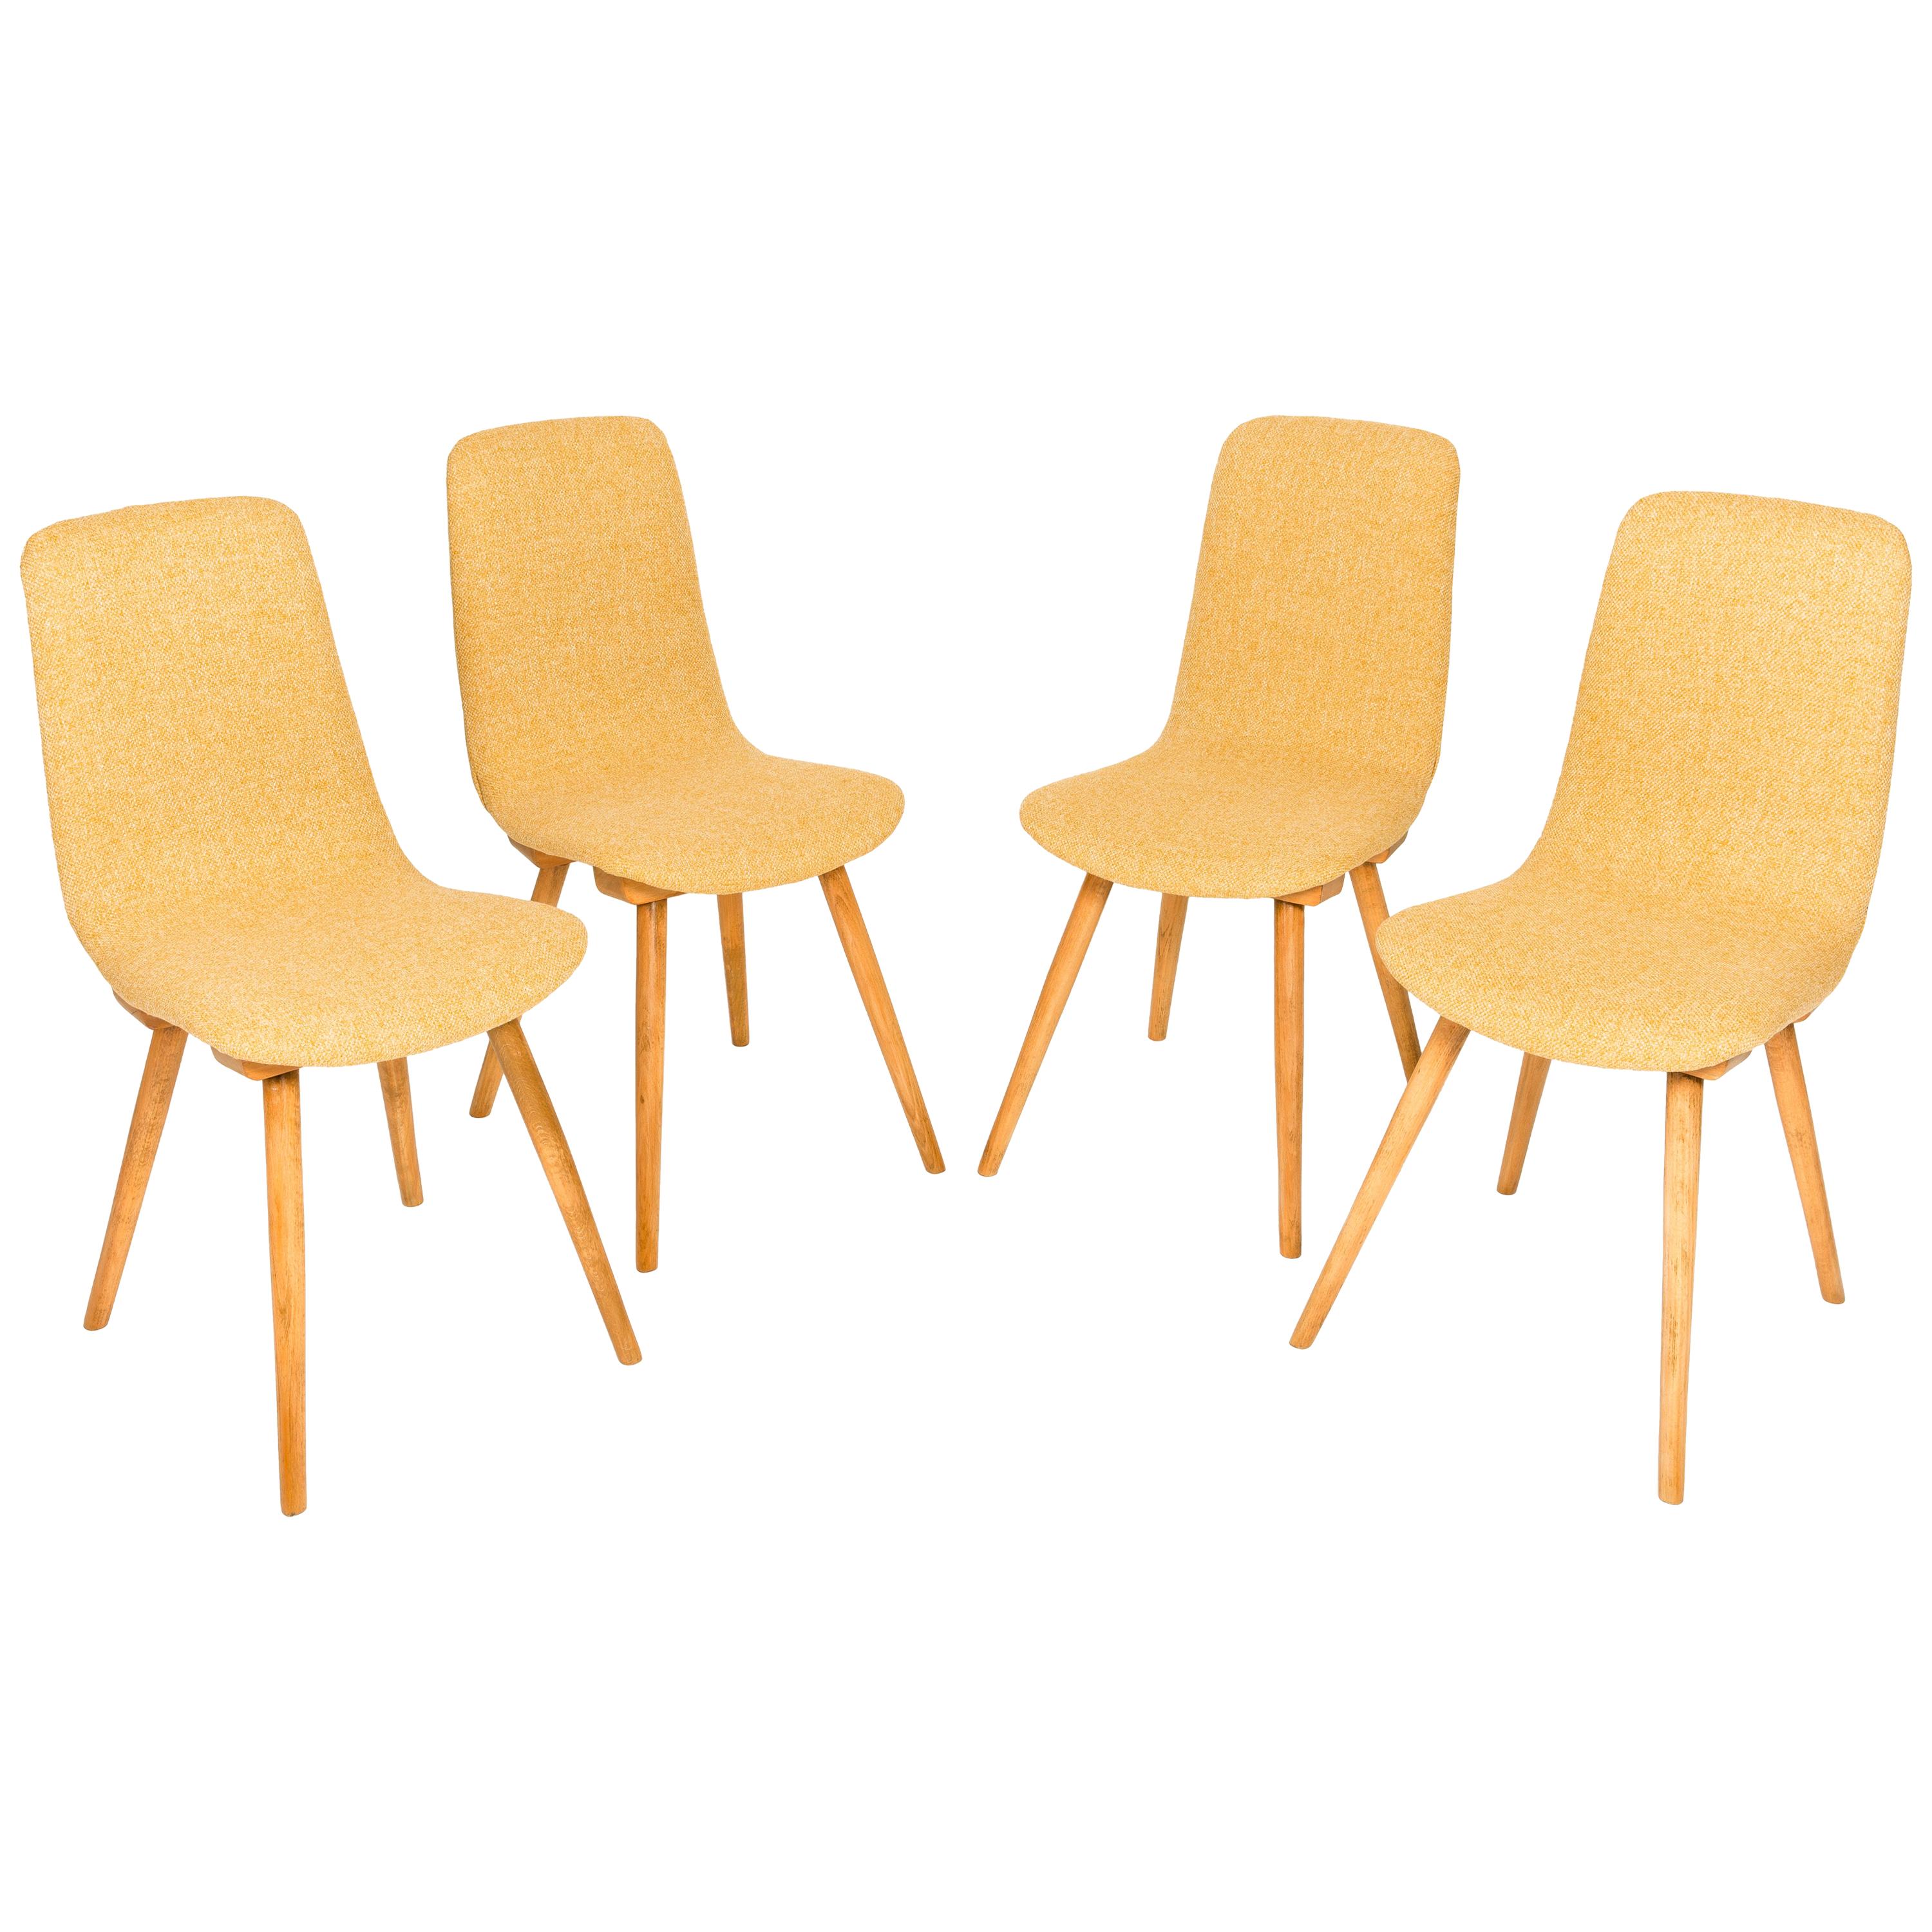 Set of Four 20th Century Fameg Yellow Vintage Chairs, 1960s, Poland For Sale